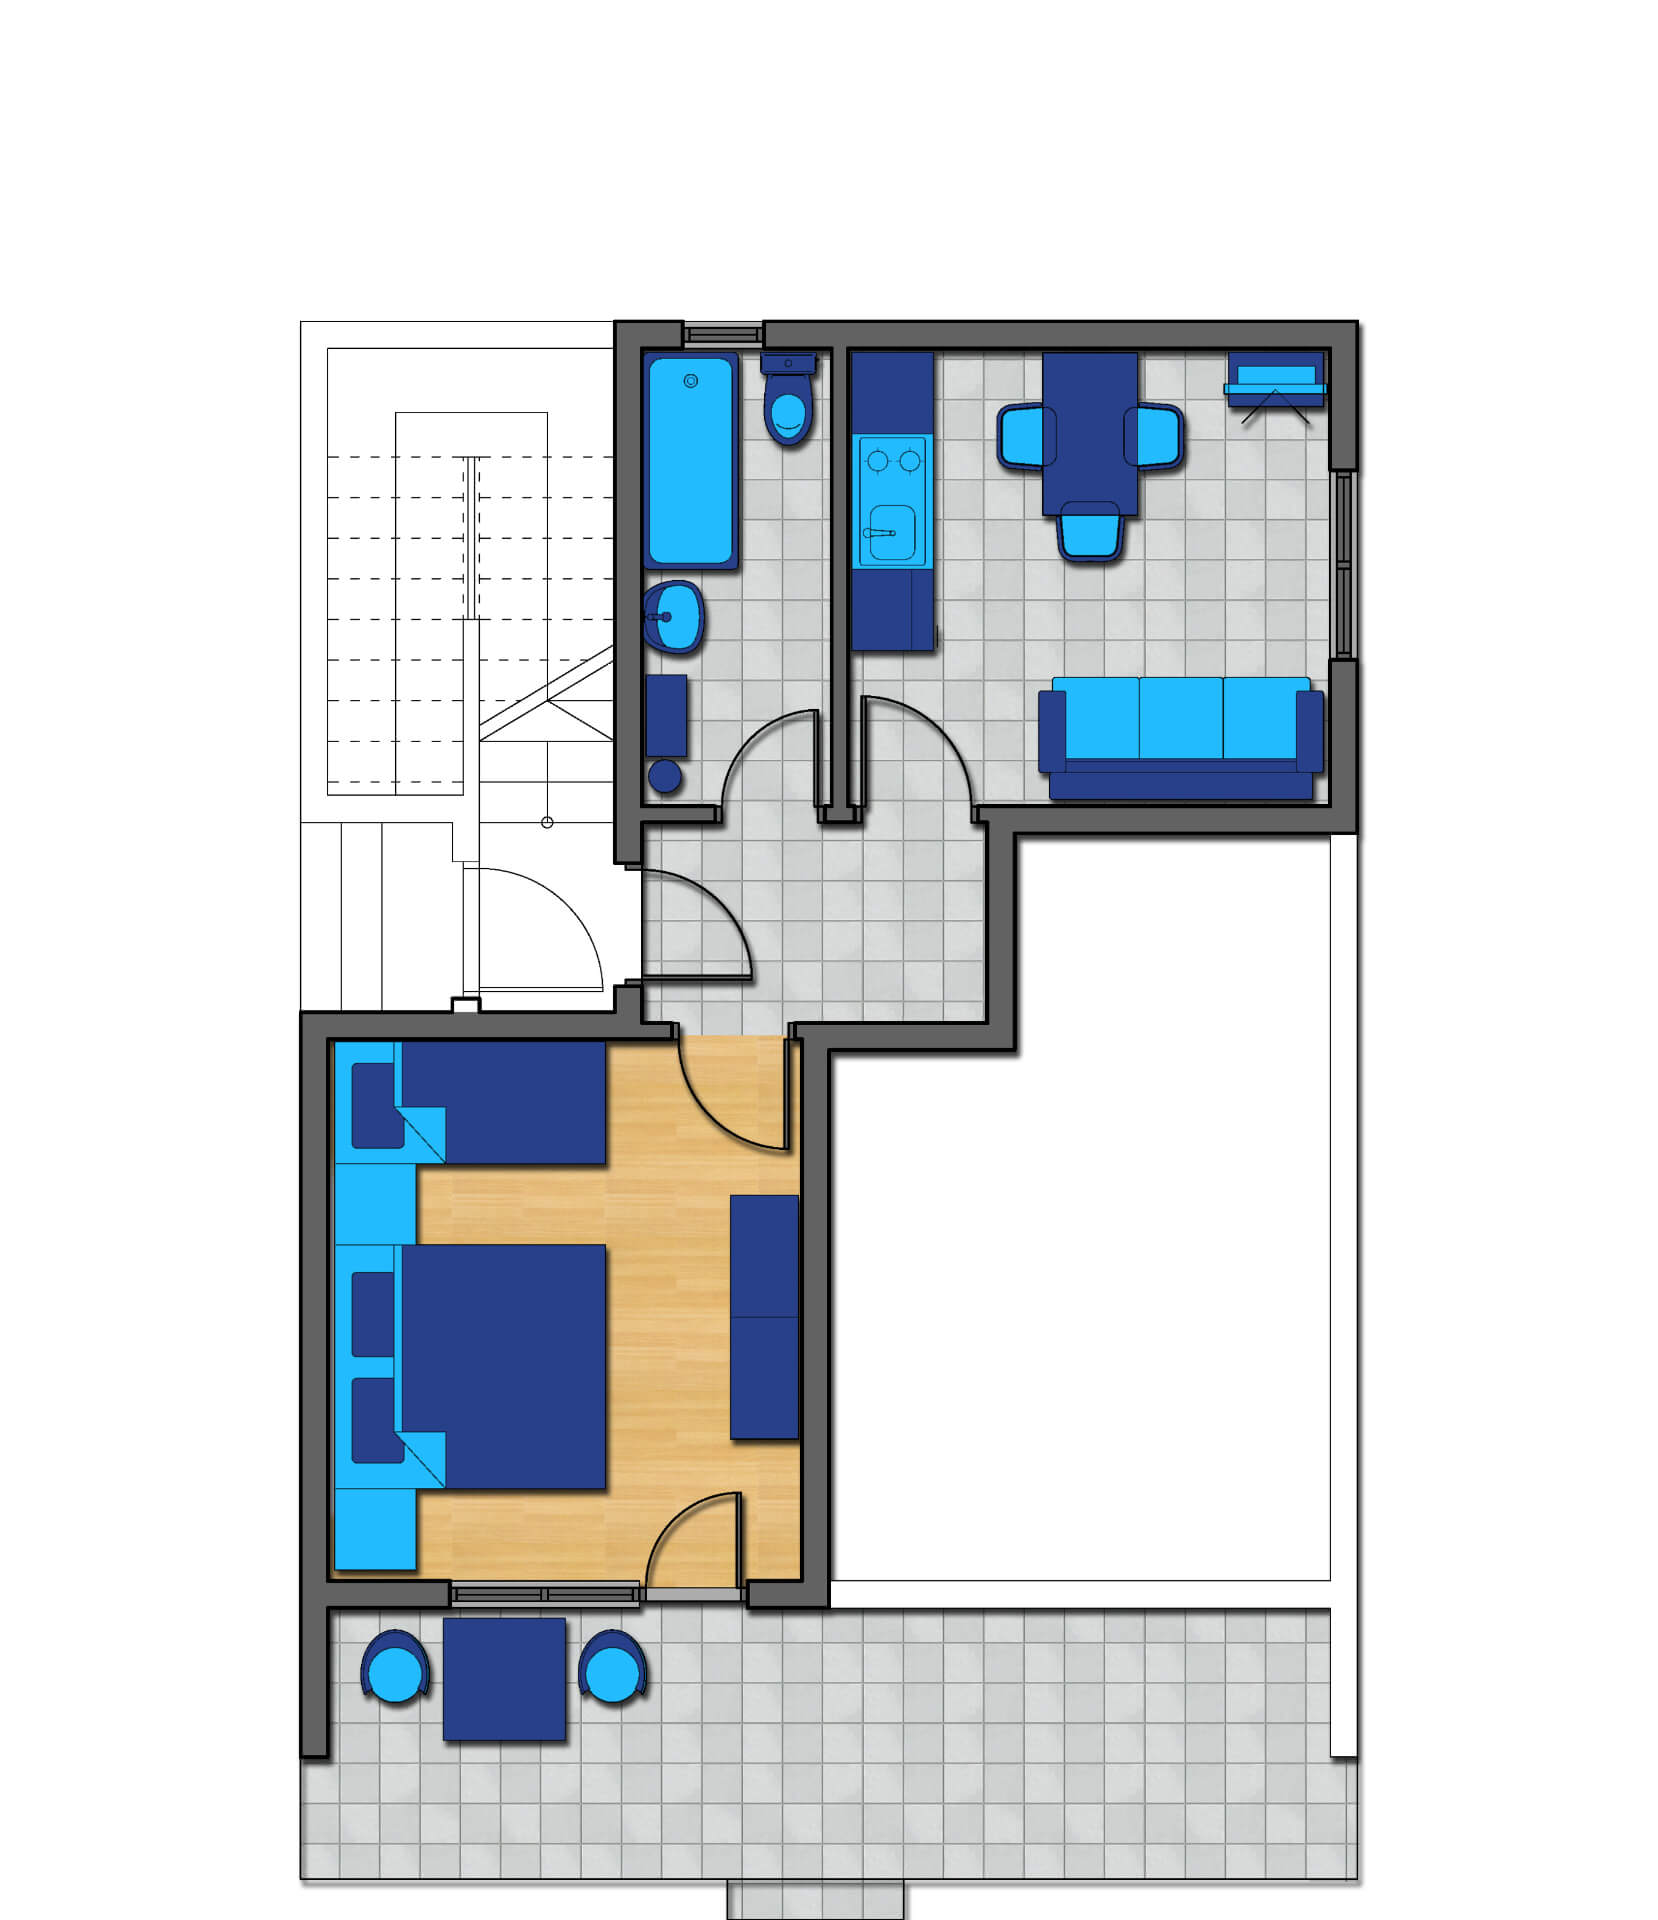 Apartment-1-layout